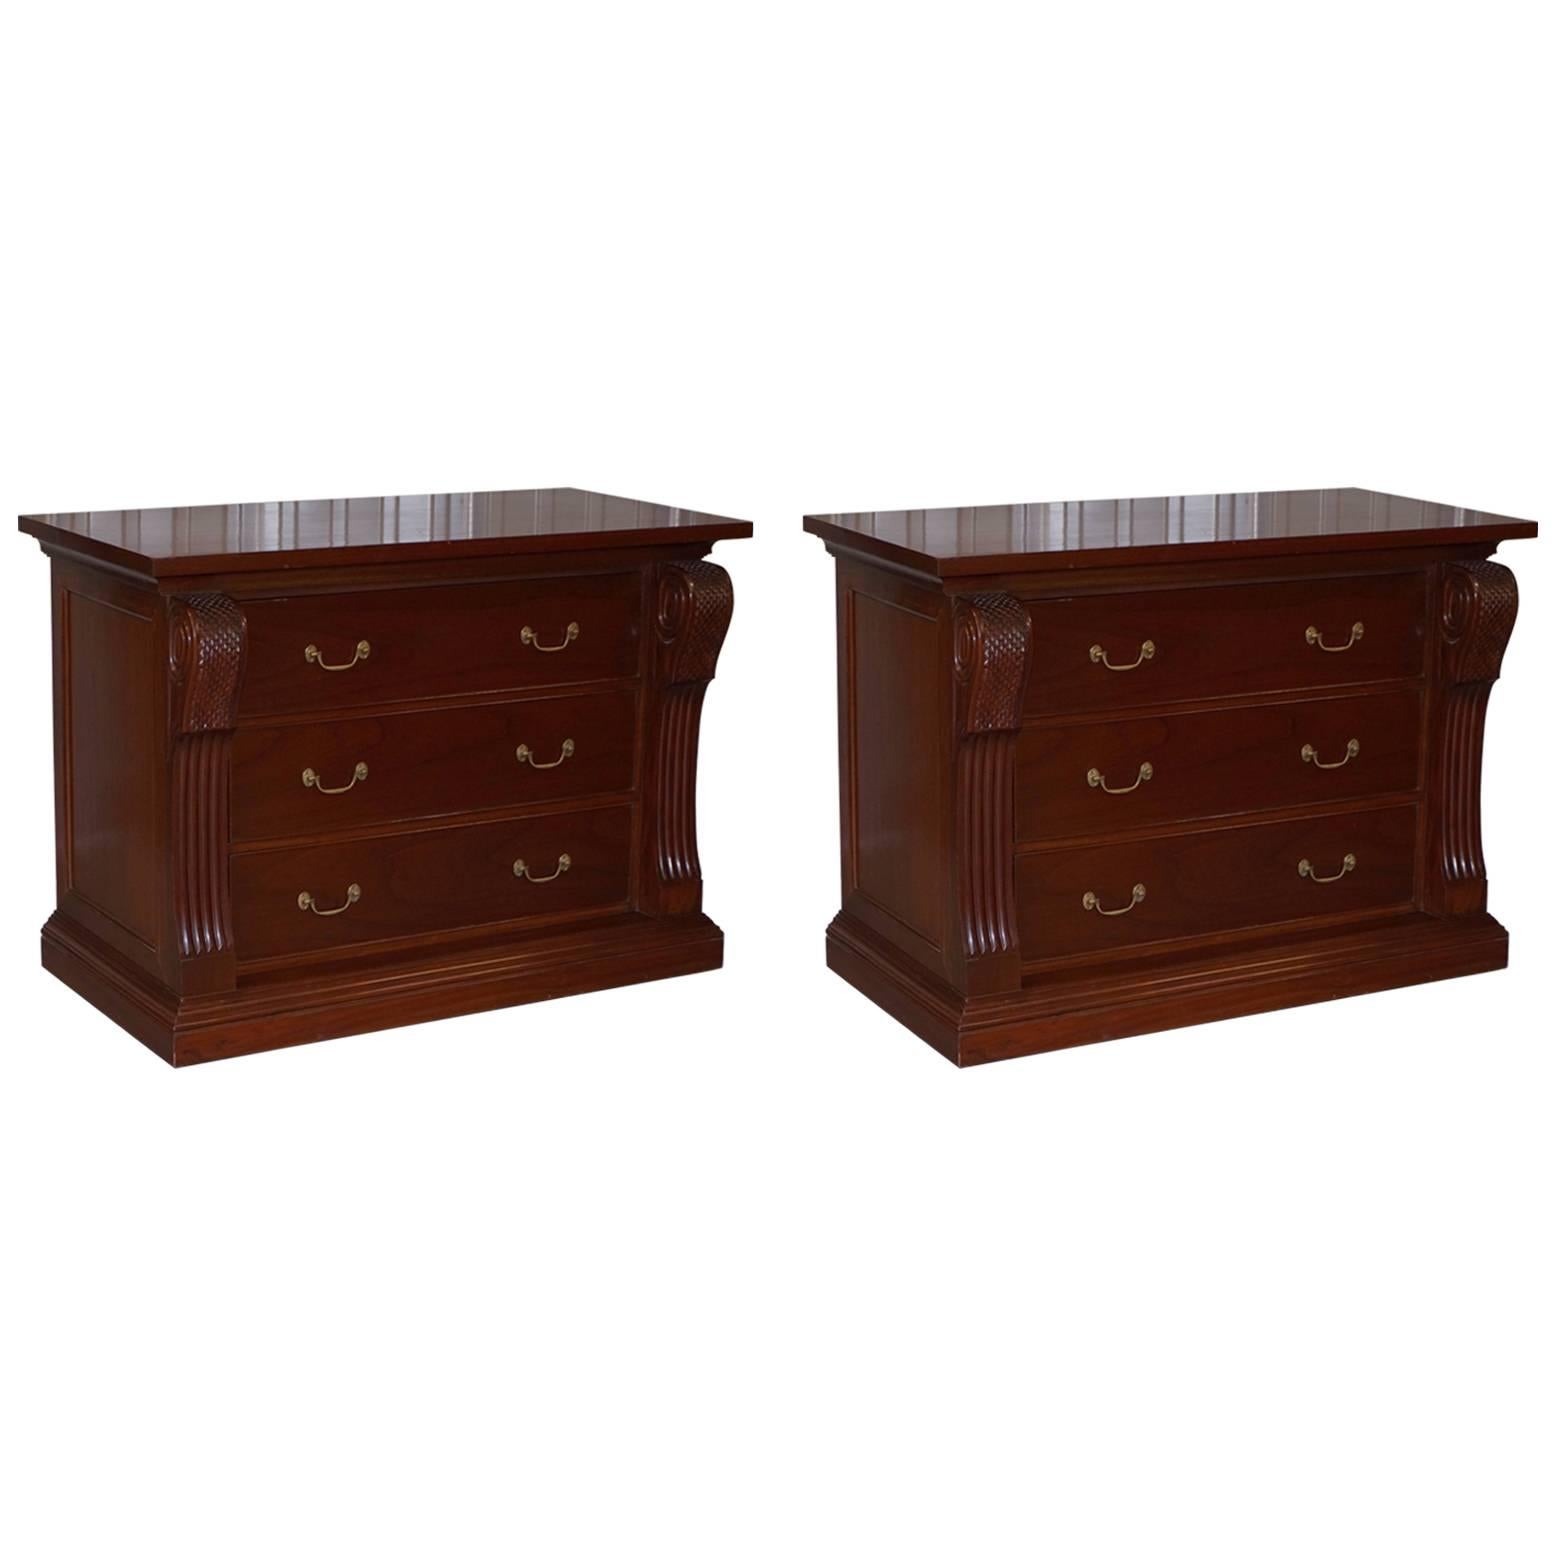 Pair of Huge Regency Style Mahogany Chest of Drawers